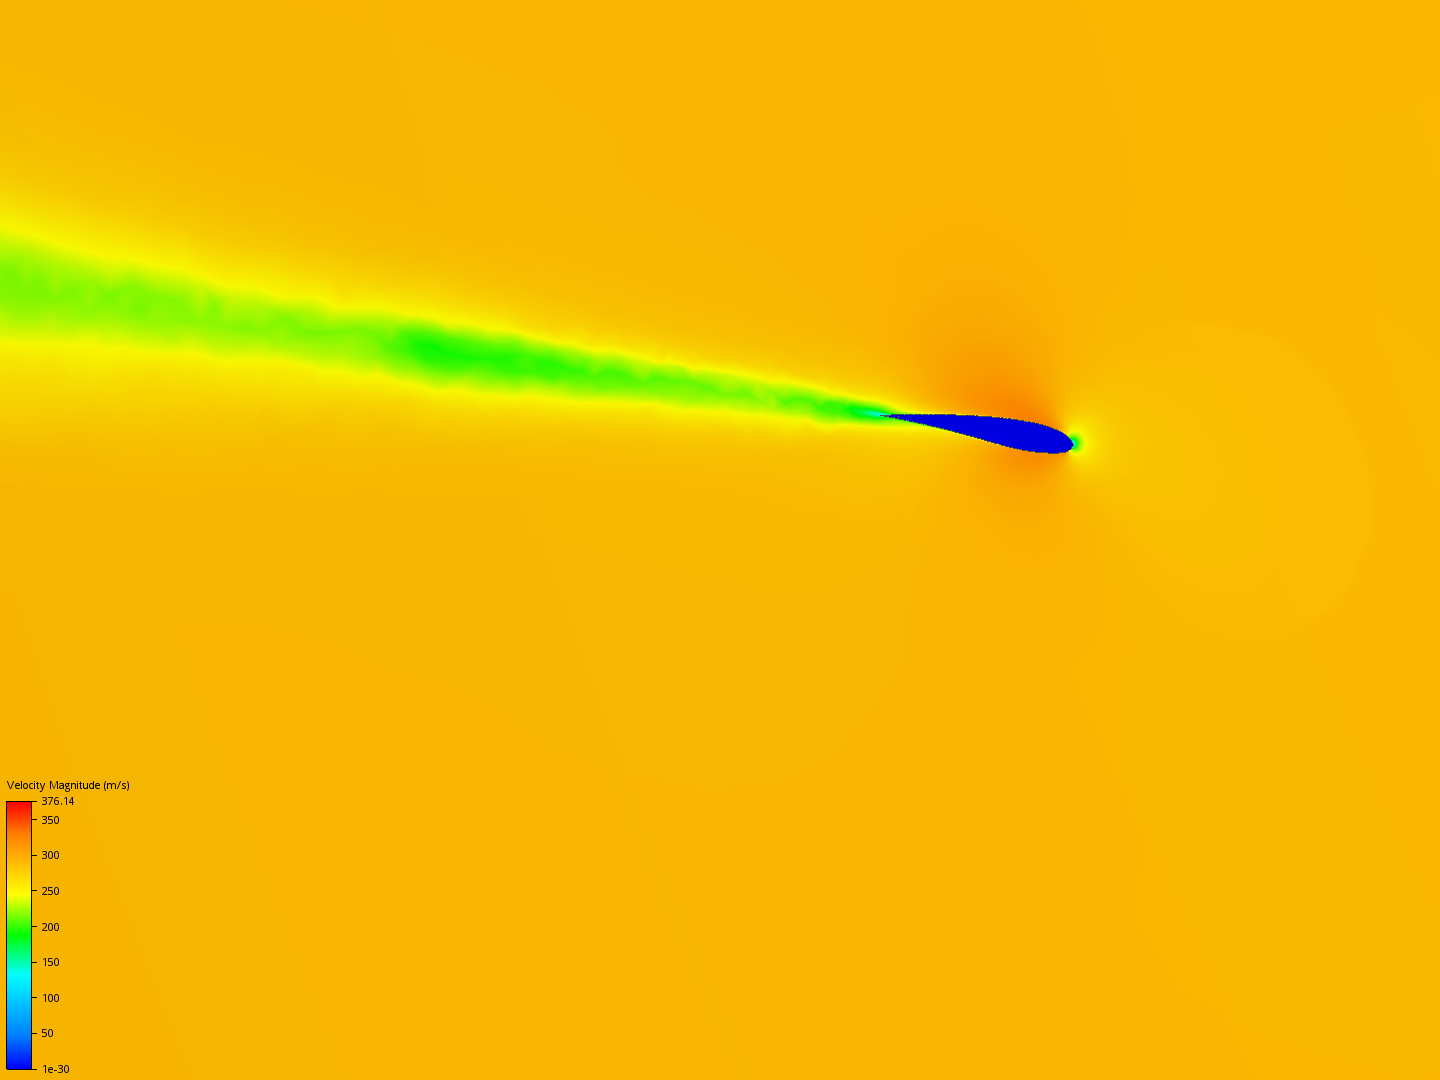 Transonic flow over wing - 3D image